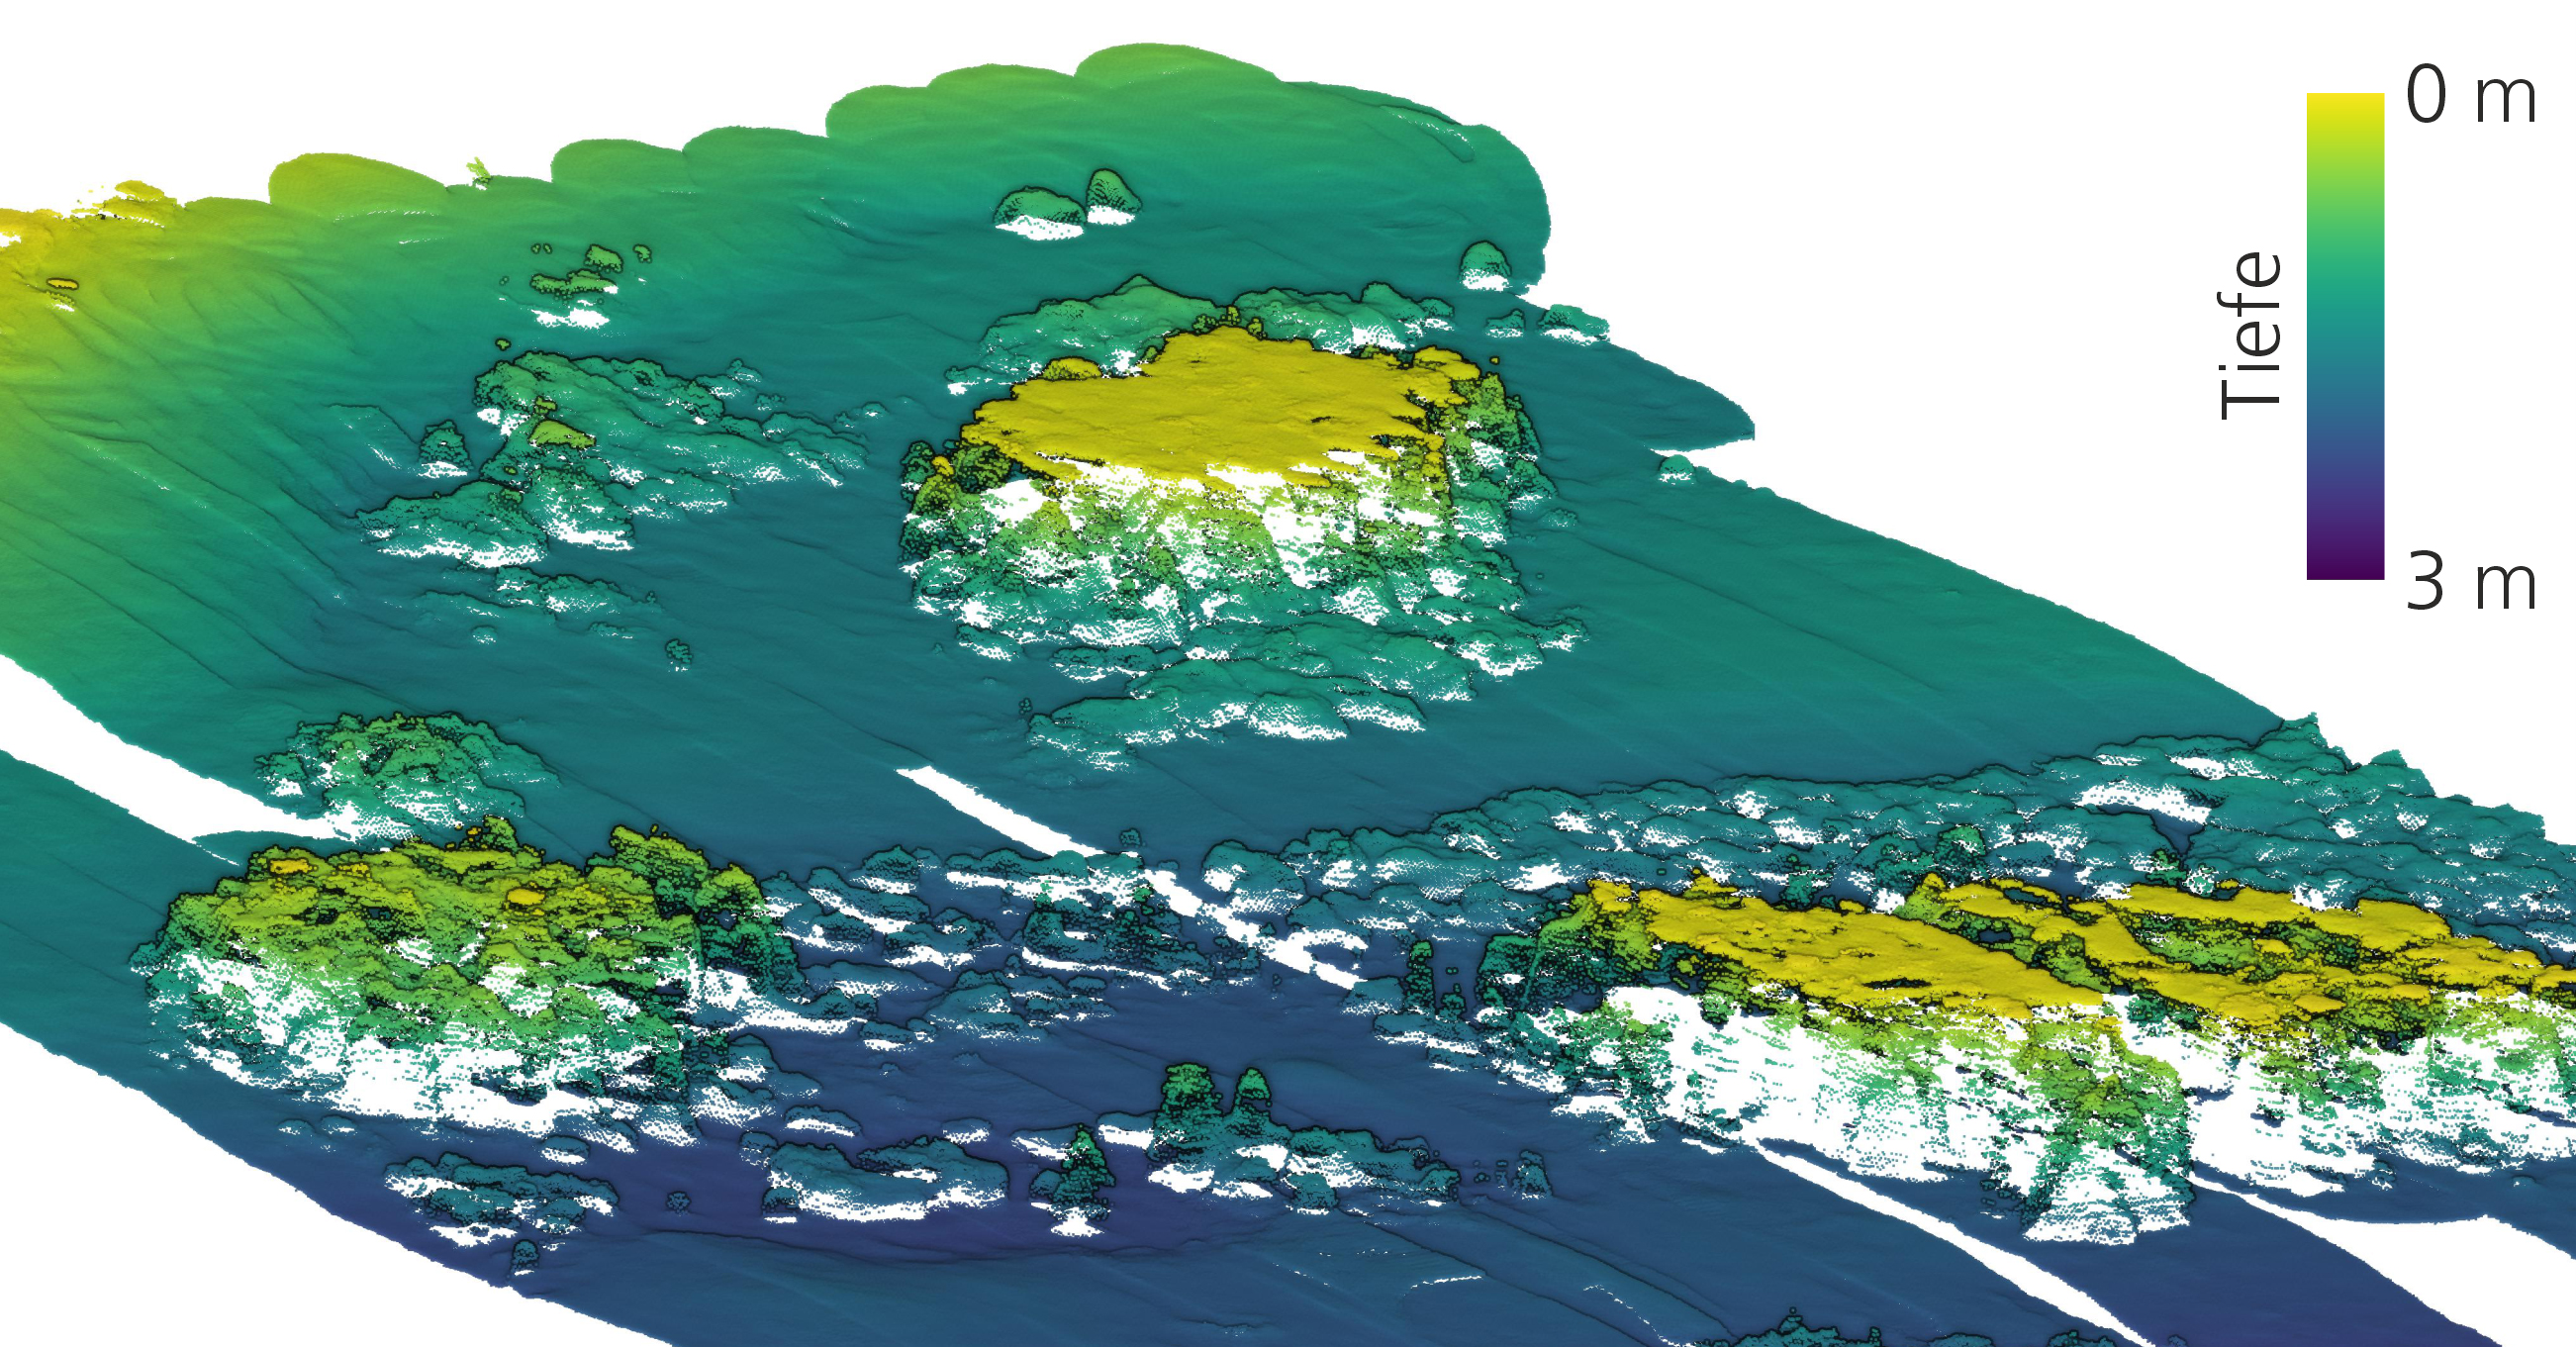 Laserbased bathymetry: topographical measurement of shallow water bodies